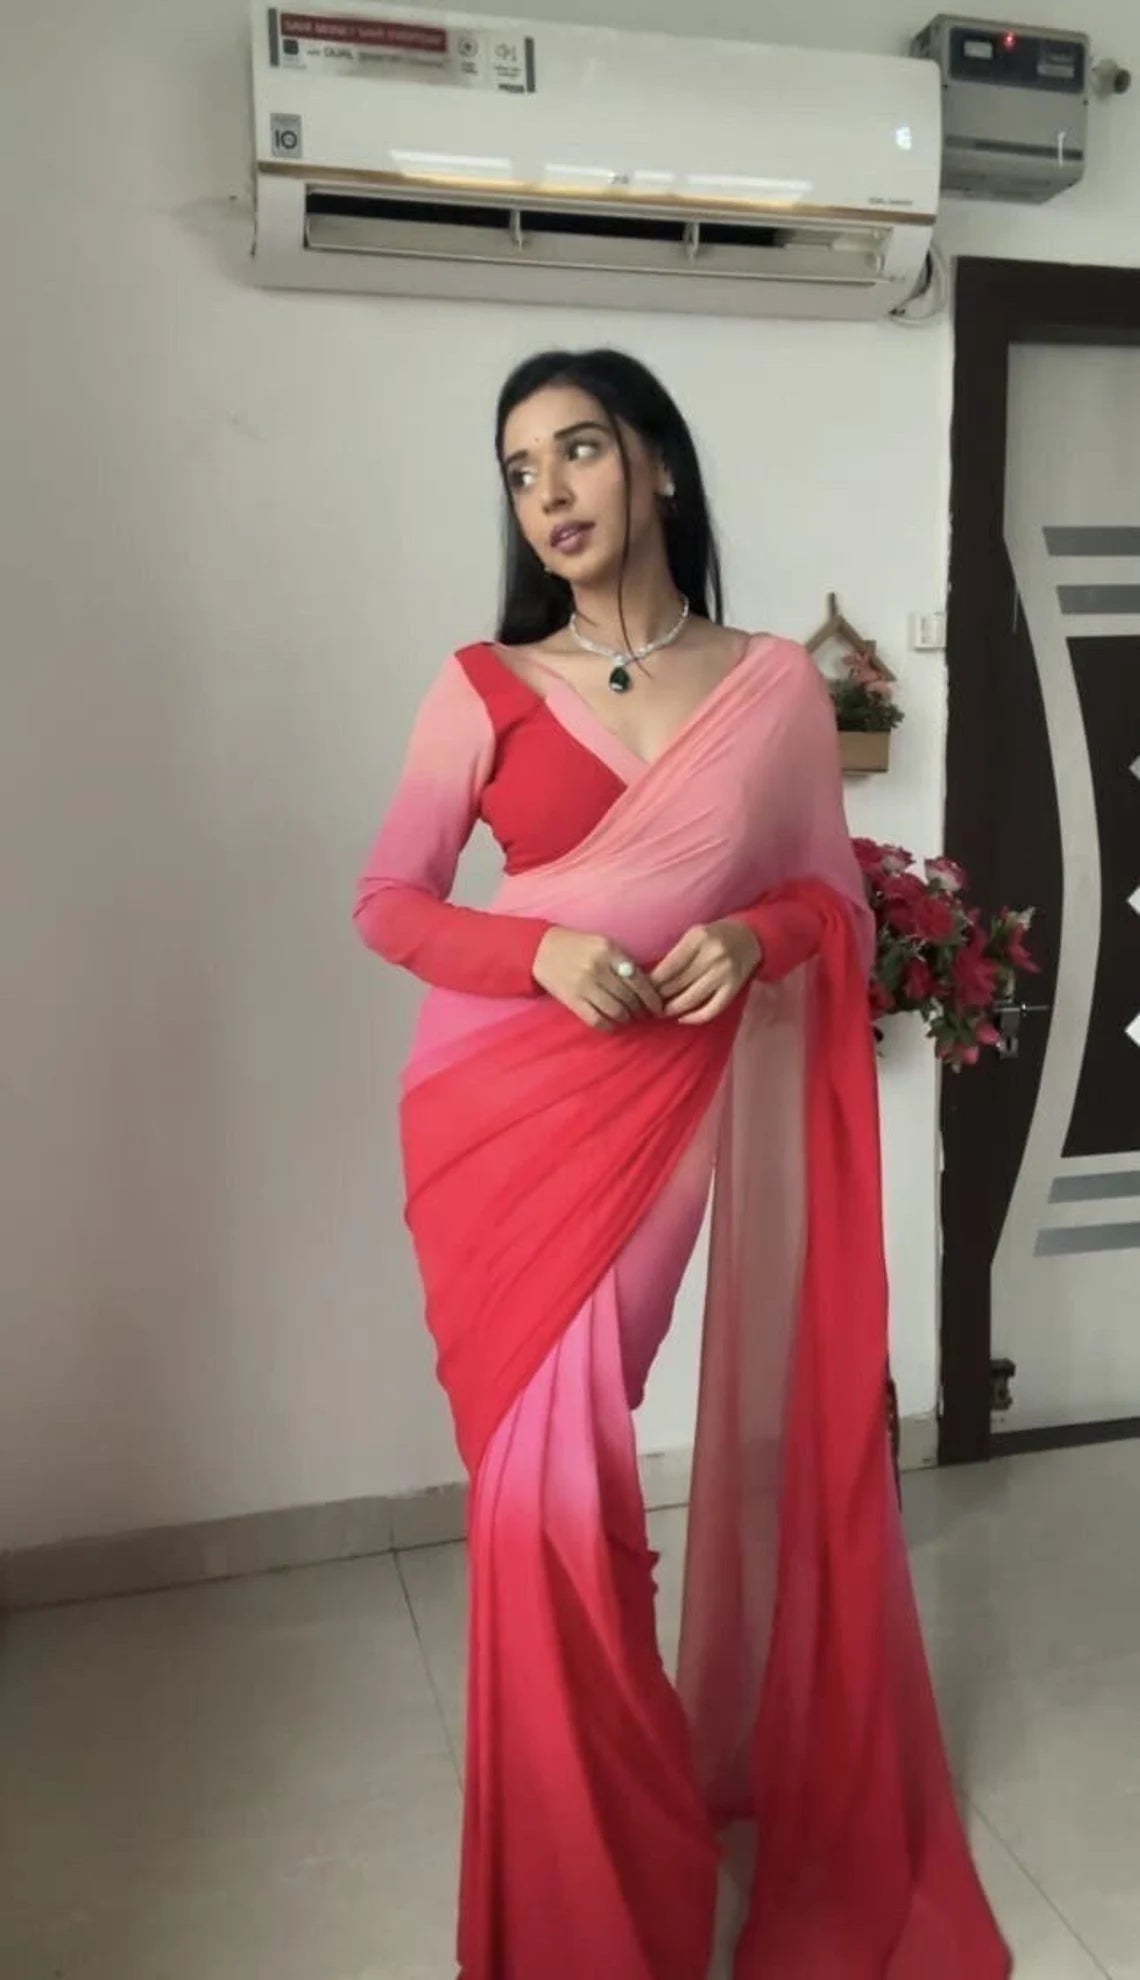 Pre-Stitched Red Pink Color Saree Fancy Shedding Printed Saree With Blouse Piece Designer Partywear Saree,